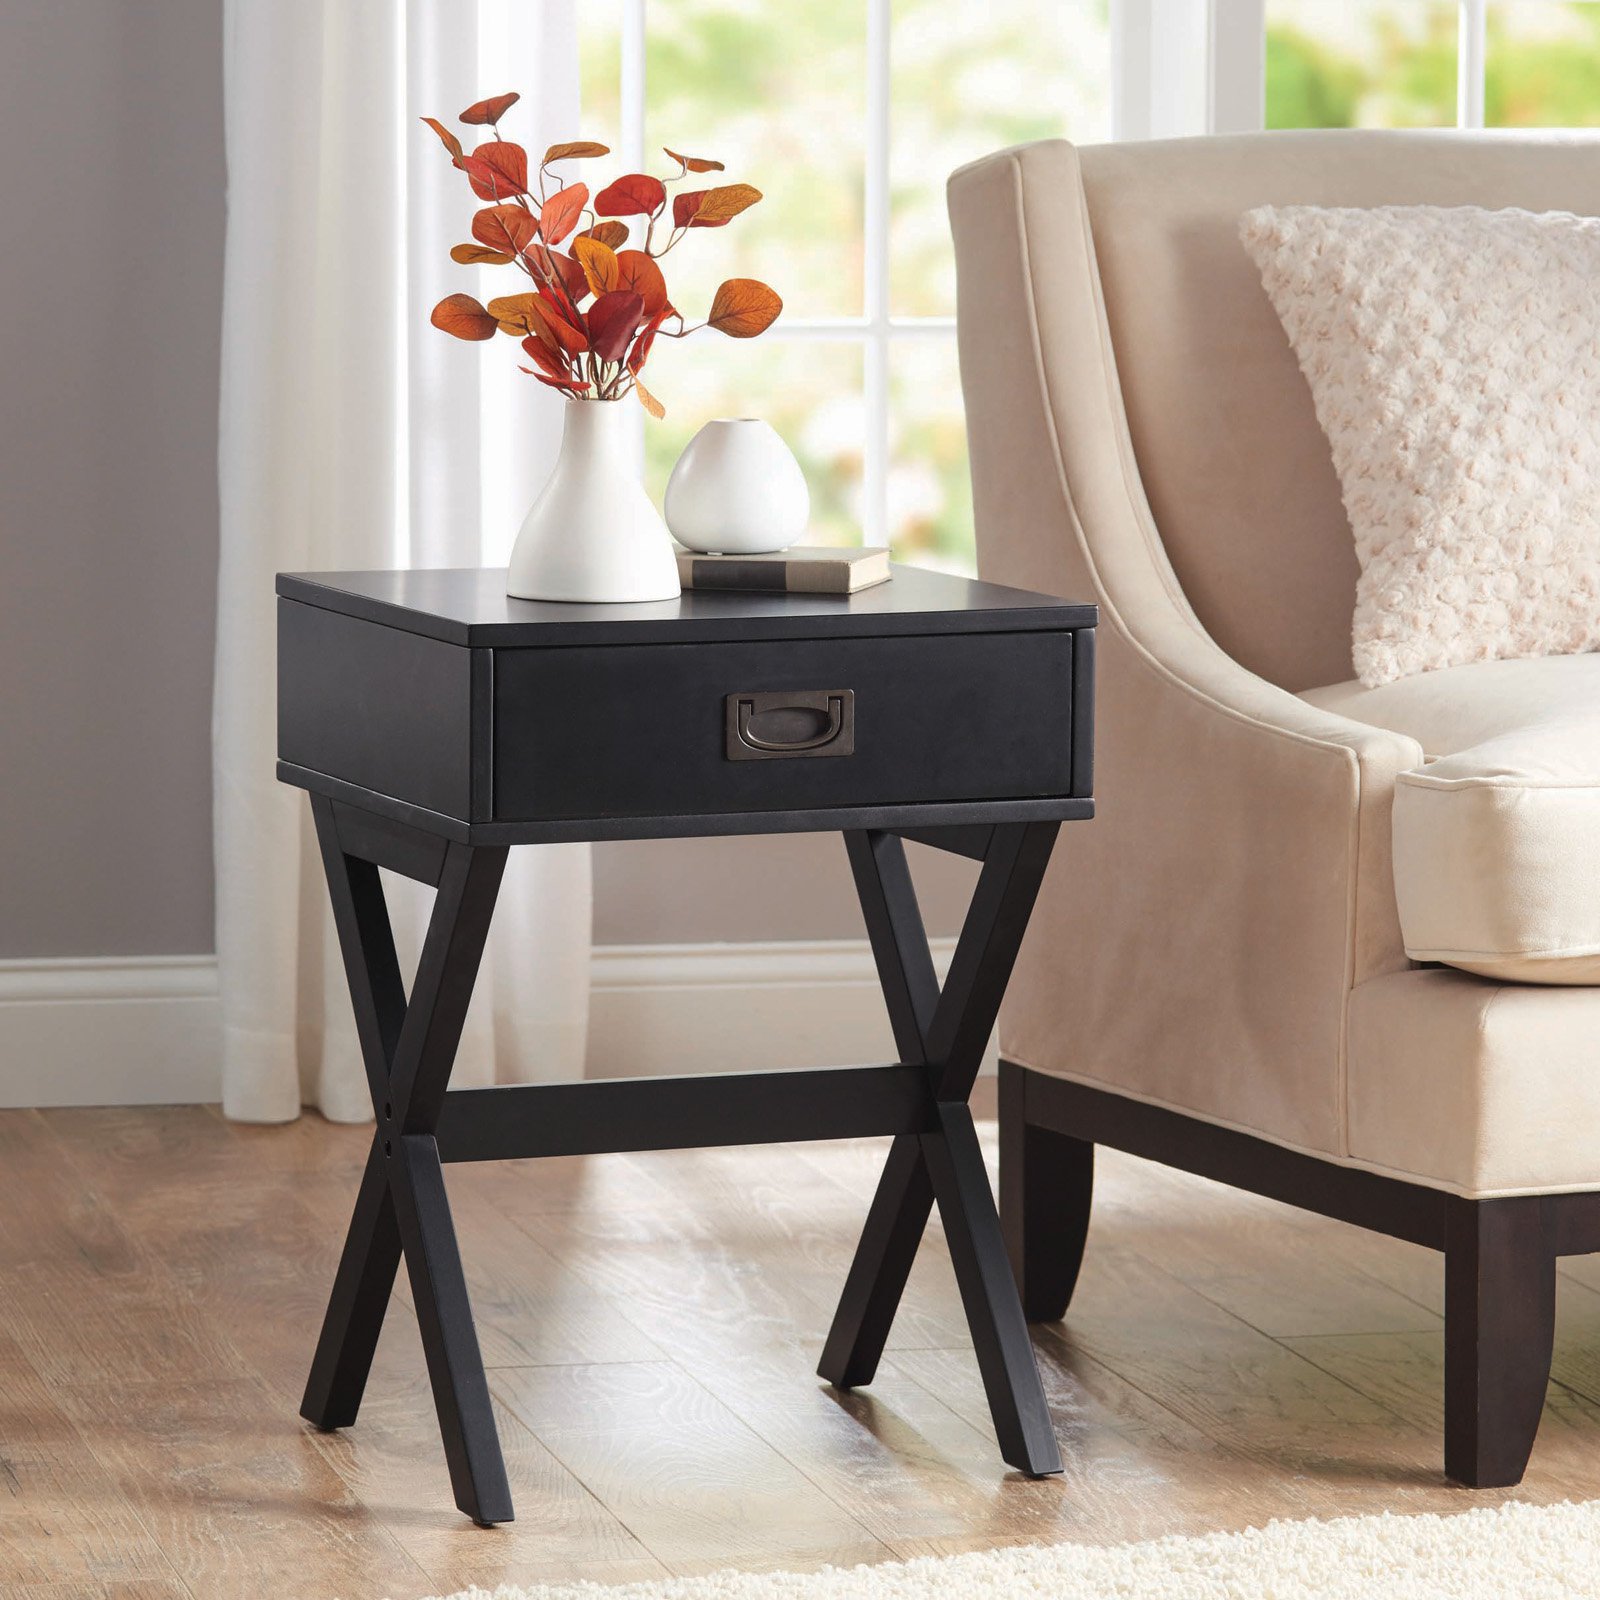 Better Homes & Gardens X-Leg Accent Table with Drawer, Multiple Colors - image 2 of 6